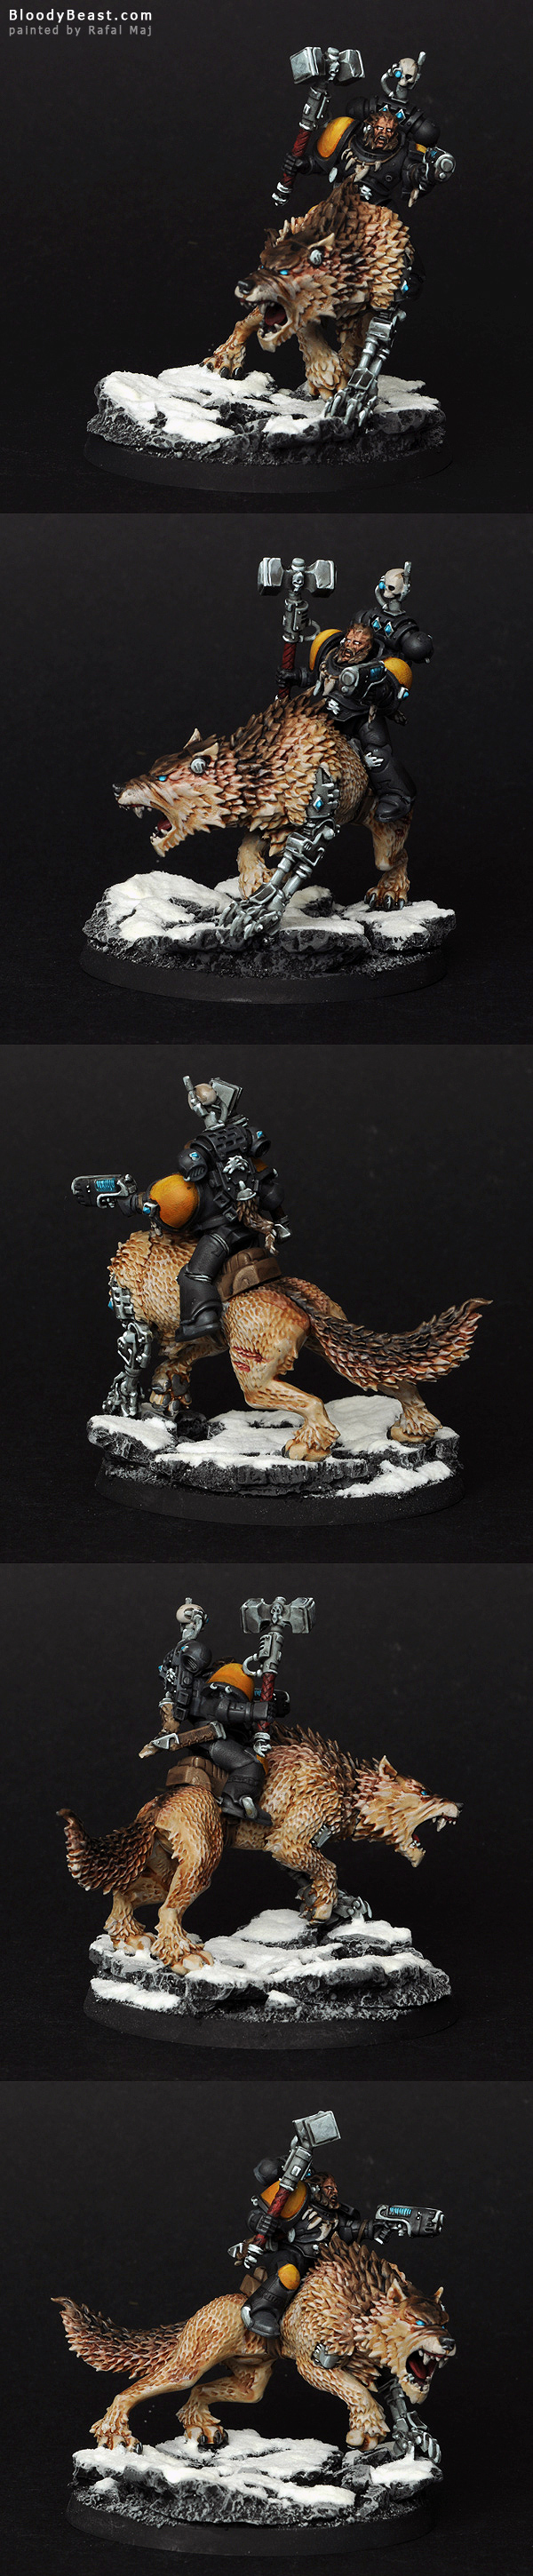 Space Wolves Thunderwolf Cavalry painted by Rafal Maj (BloodyBeast.com)